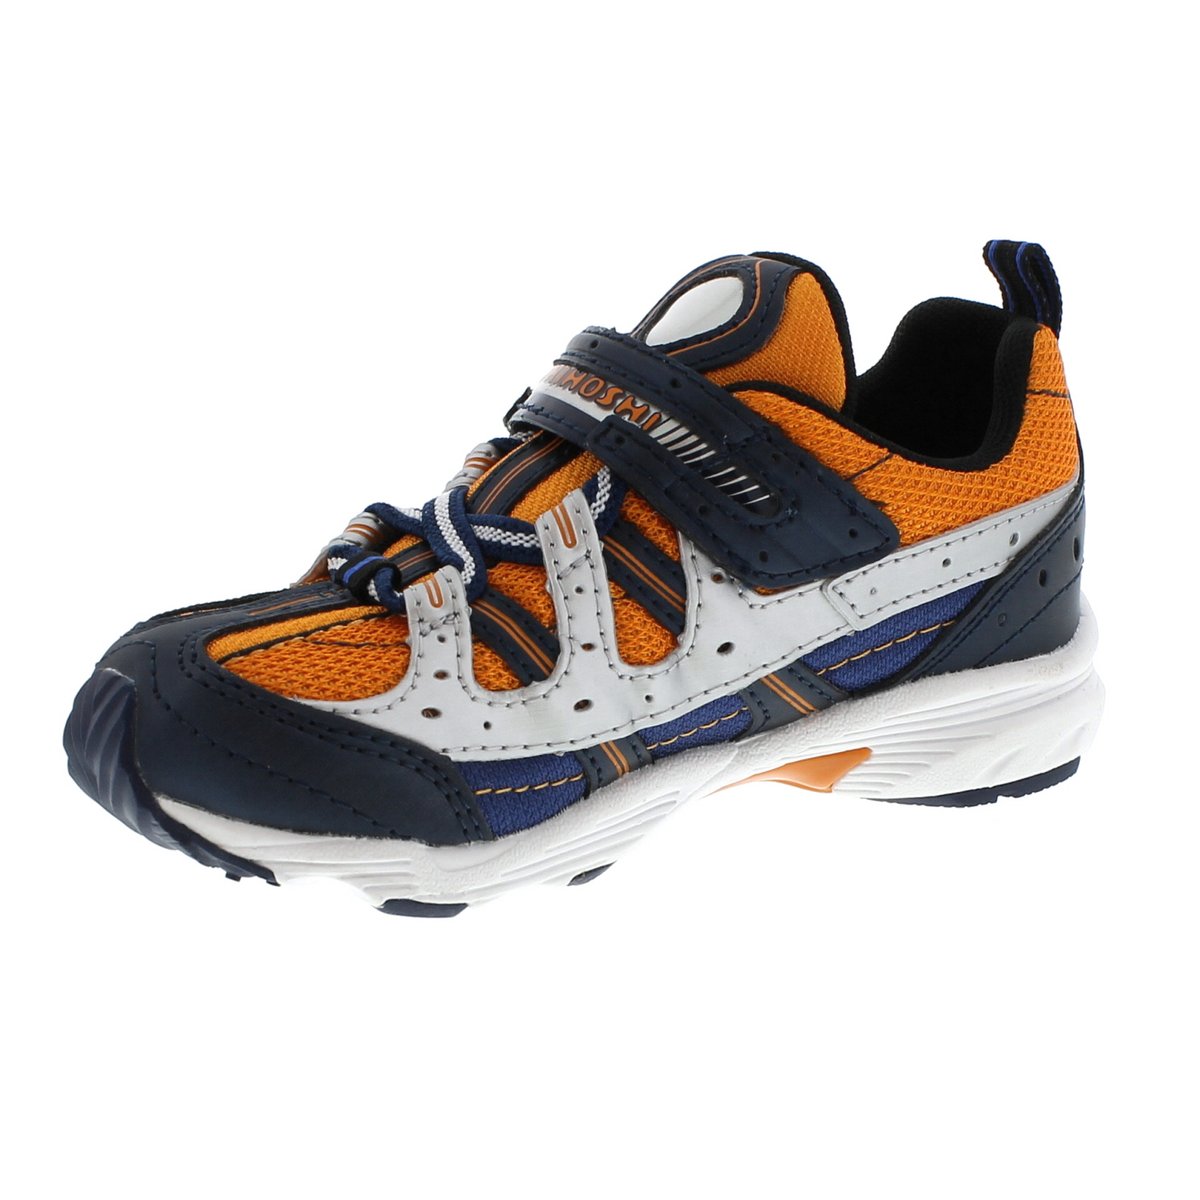 Child Tsukihoshi Speed Sneaker in Navy/Orange from the front view